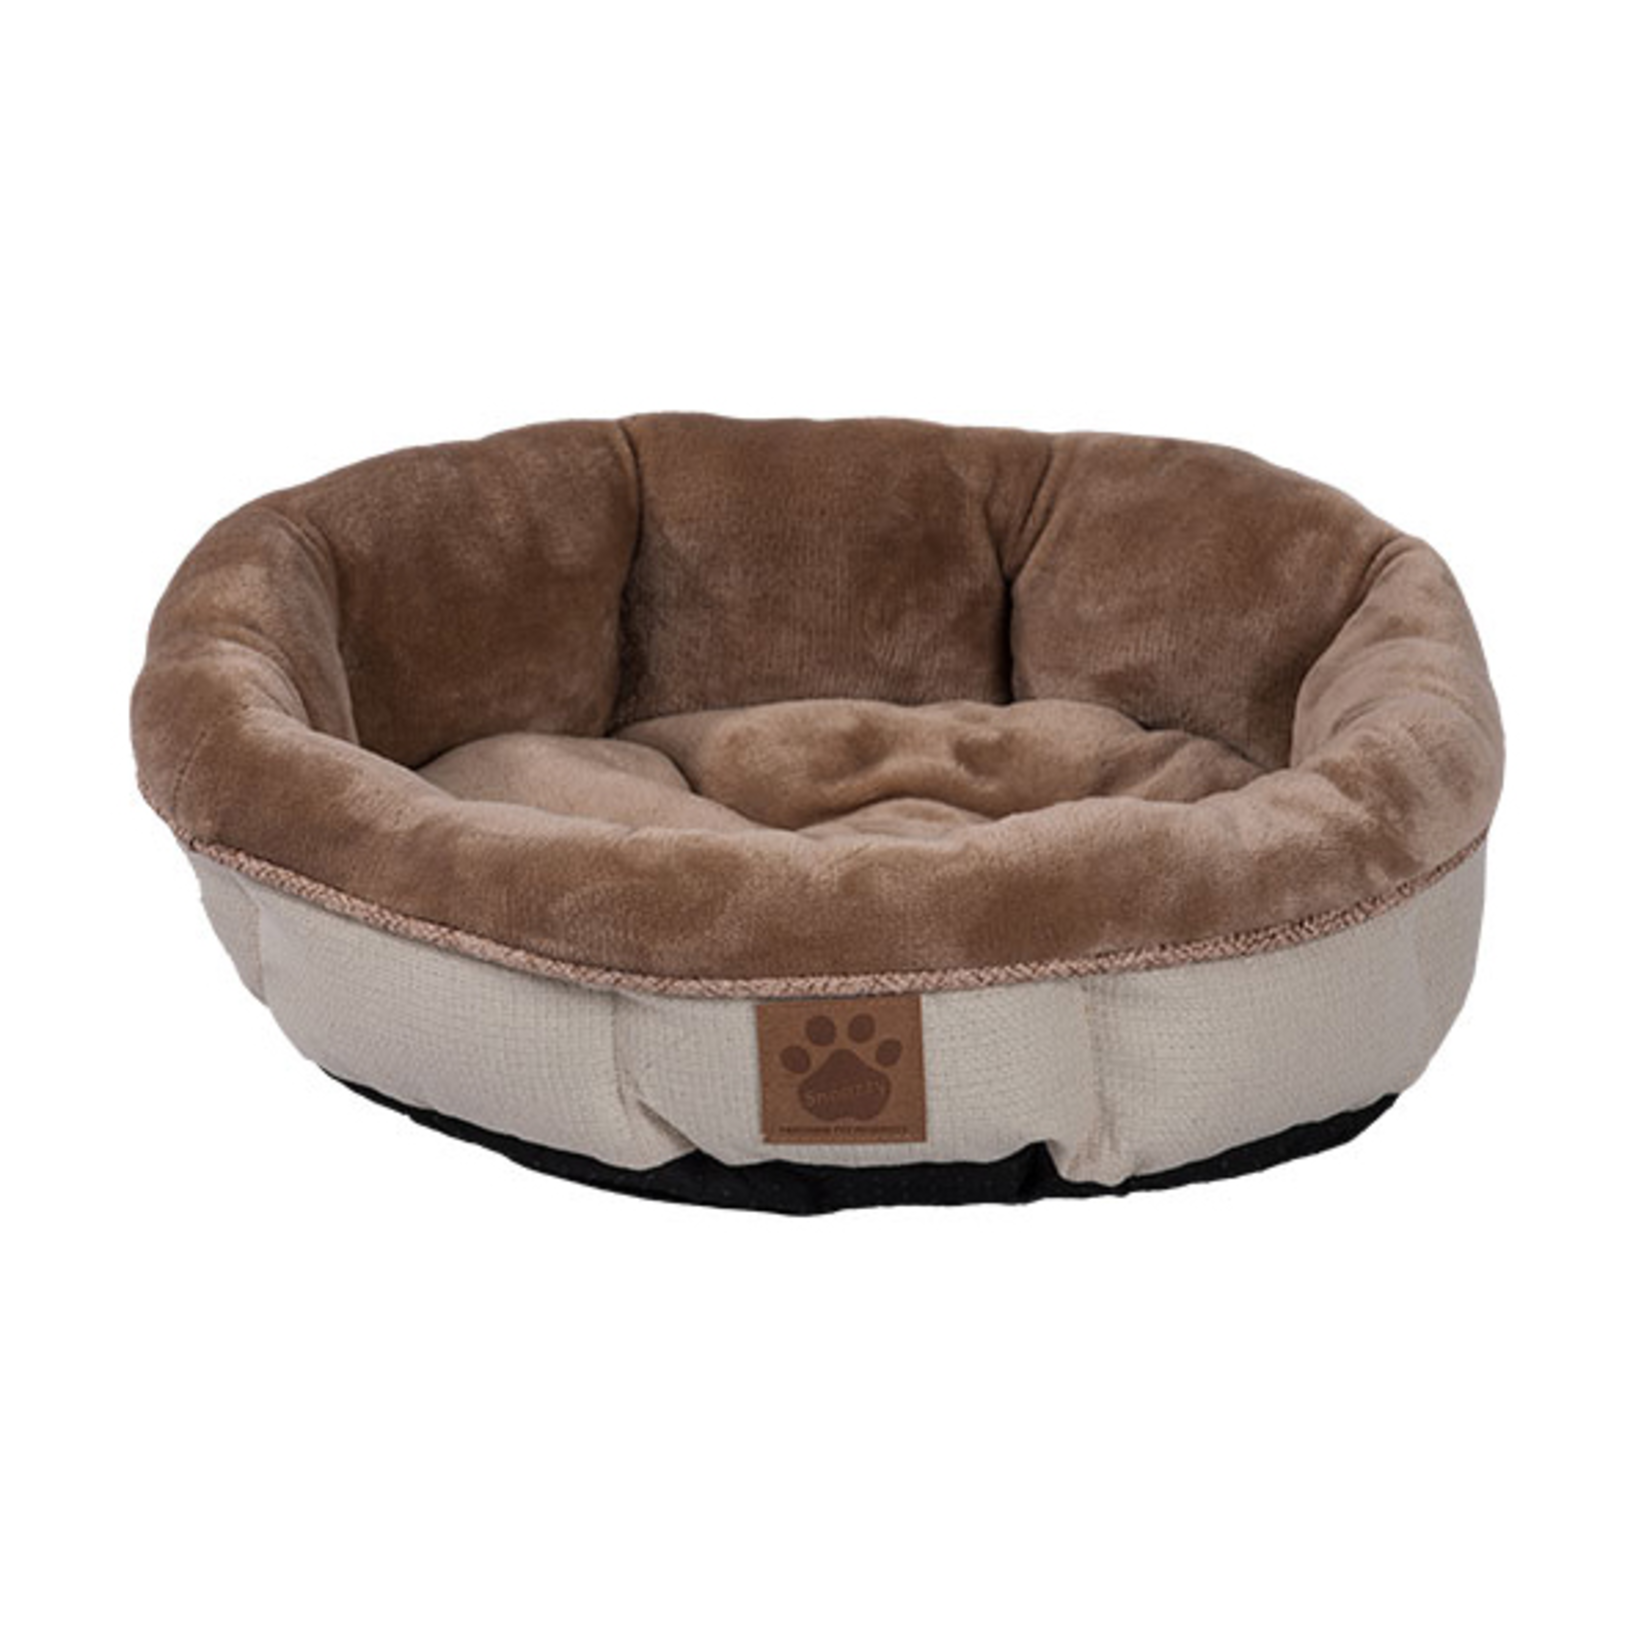 Snoozzy Snz Rustic Elegance Round Shearling Bed Buff 17x4.5"